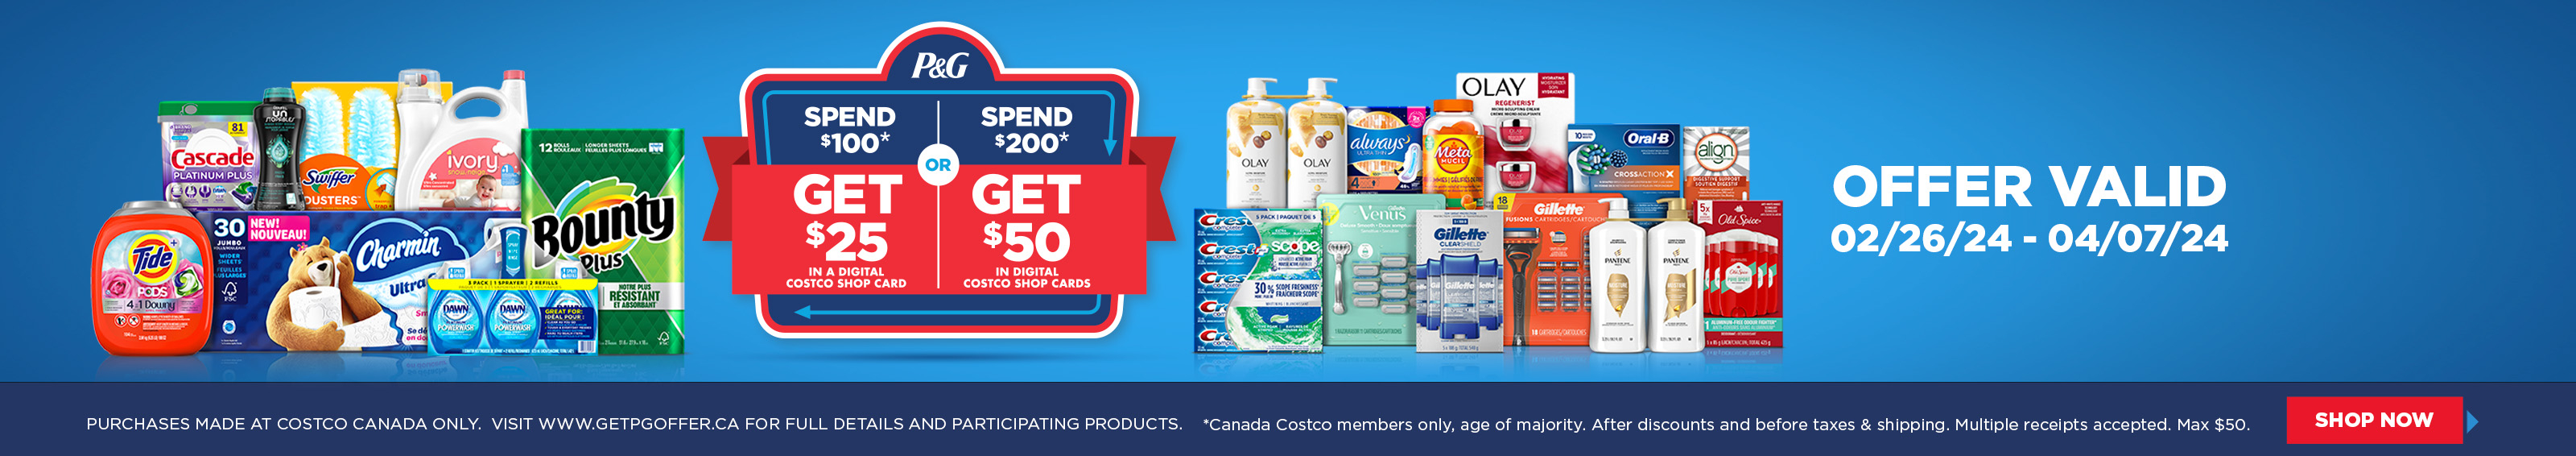 P&G. Spend $100, get $25 in a digital Costco shop card or spend $200 and get $50 in a digital Costco shop card. Valid 02/26/24 to 04/07/24. Shop now